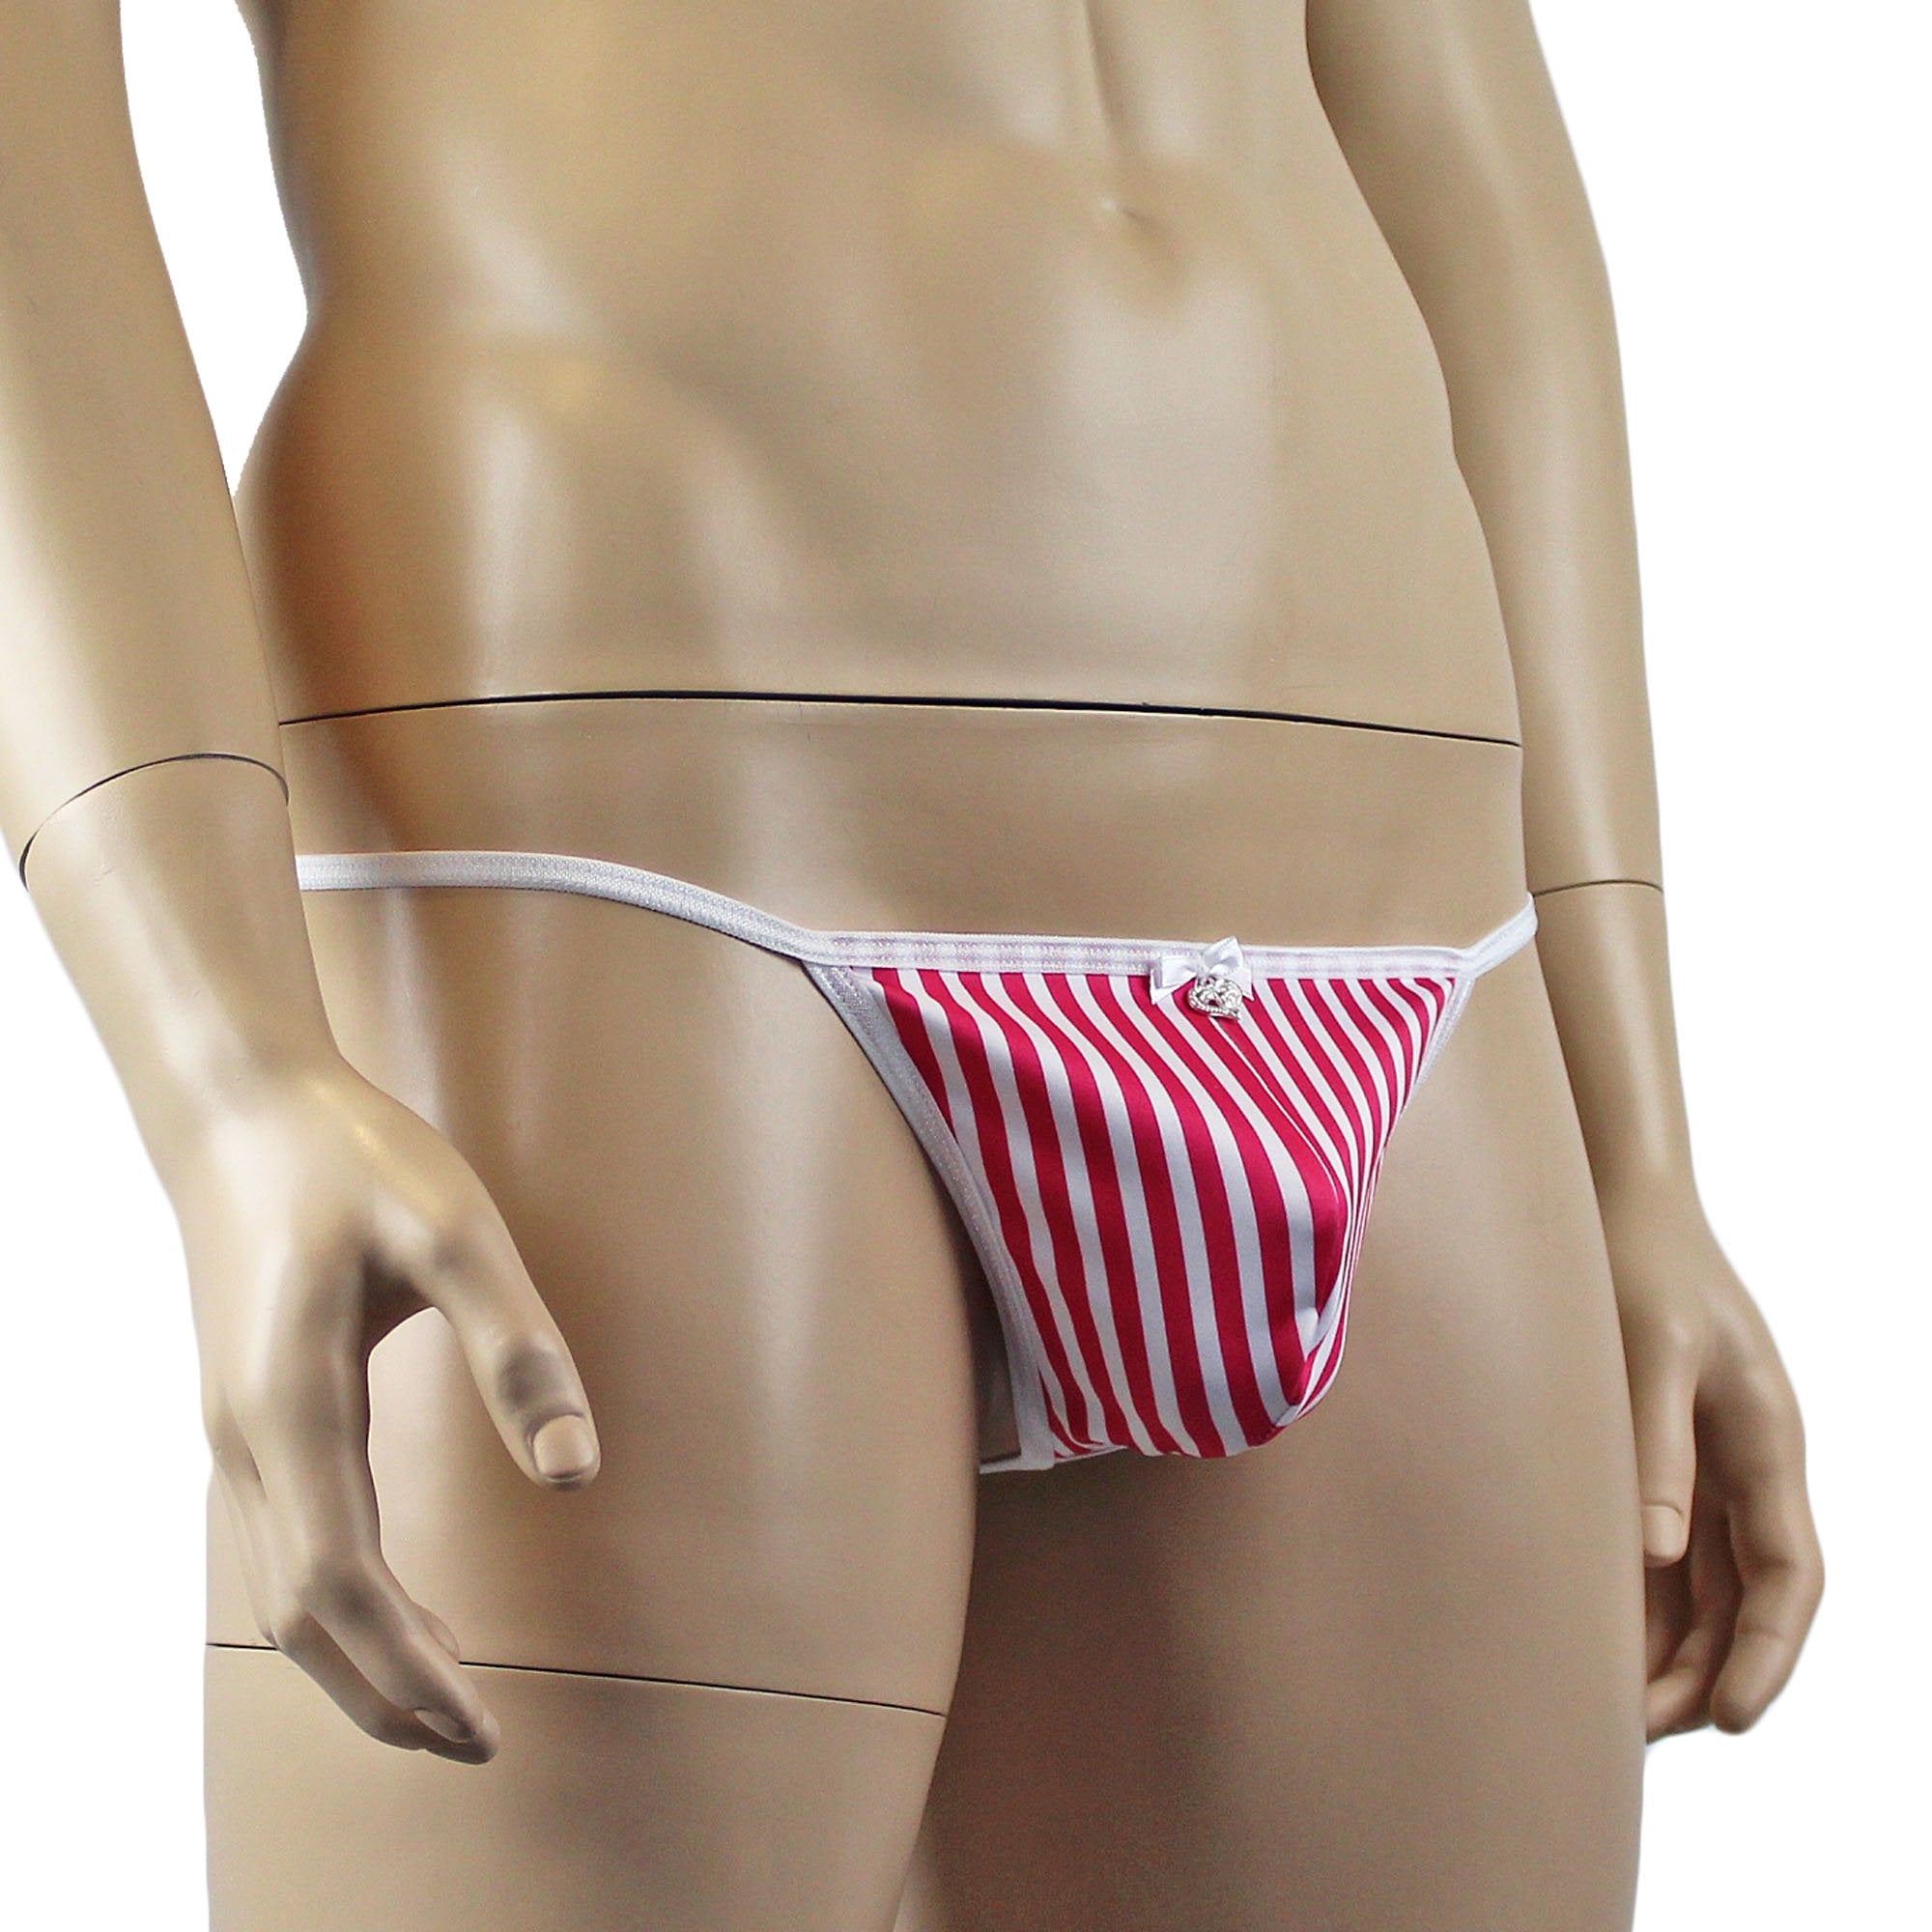 Candy Stripes Christmas Mens G string Pouch Xmas Underwear